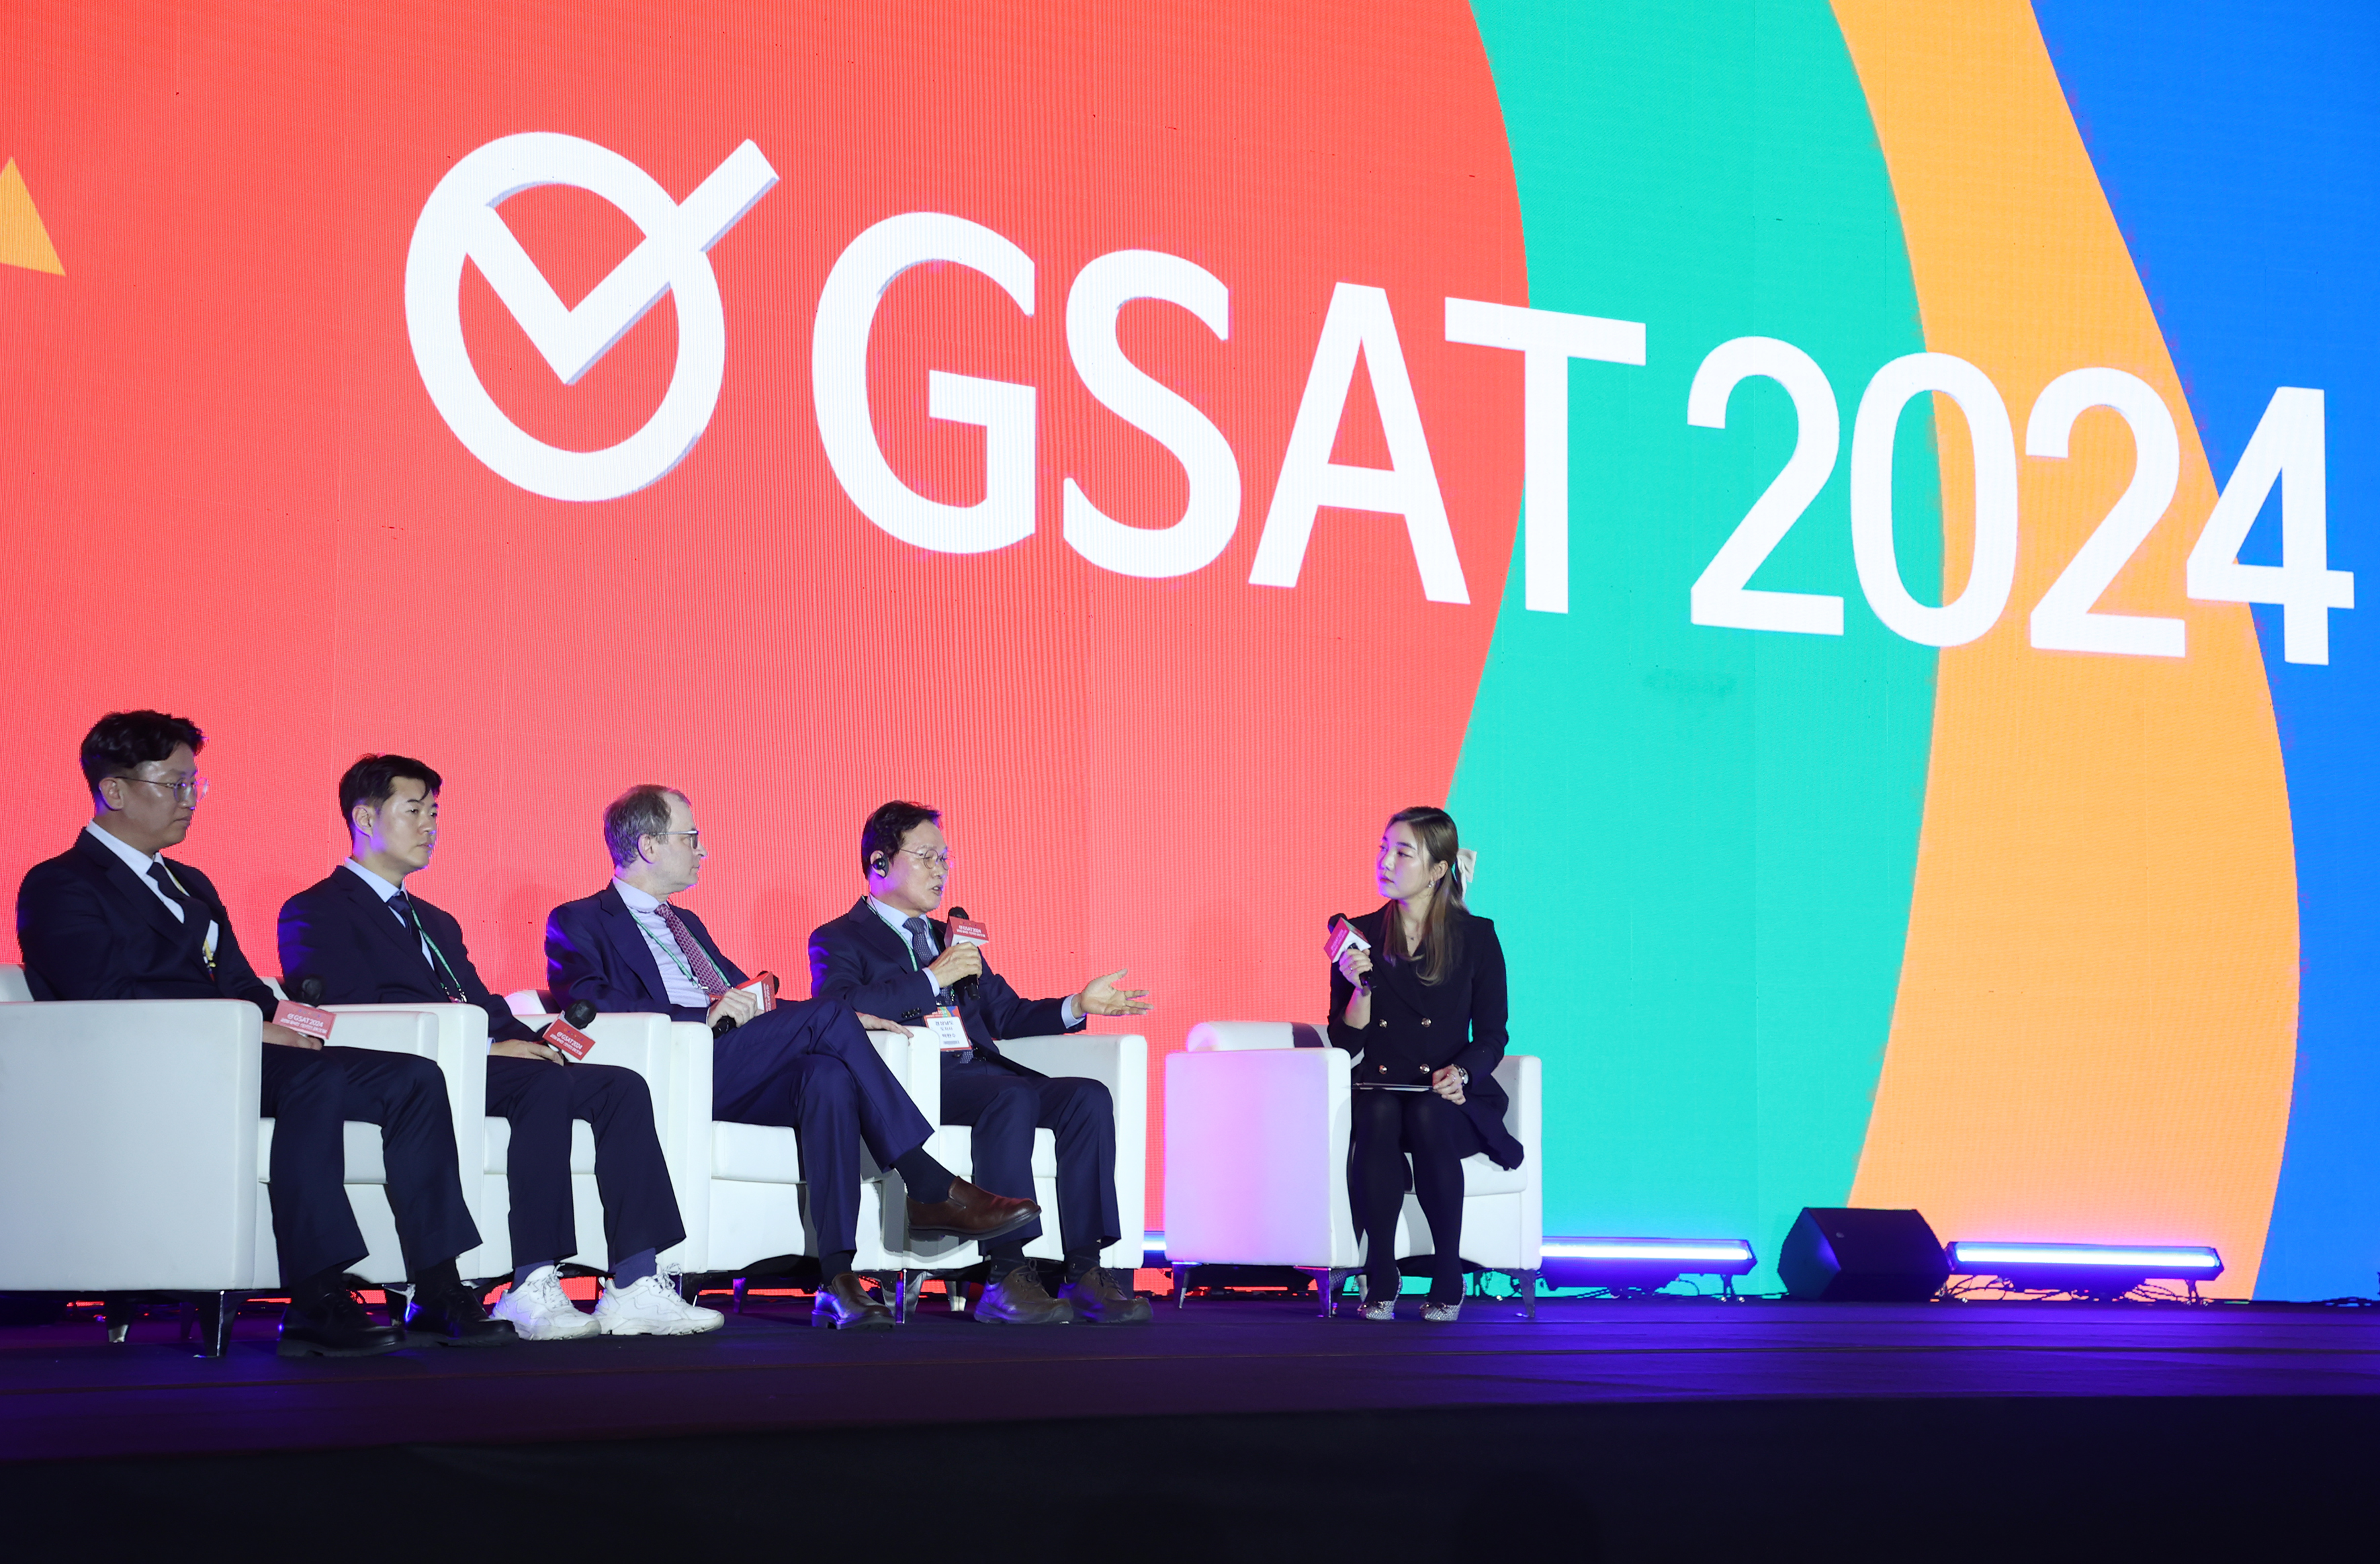 GSAT 2024 Festival Opens for a Fusion of Global Startups Gathering “the Firsts and the Bests” in One Place의 파일 이미지